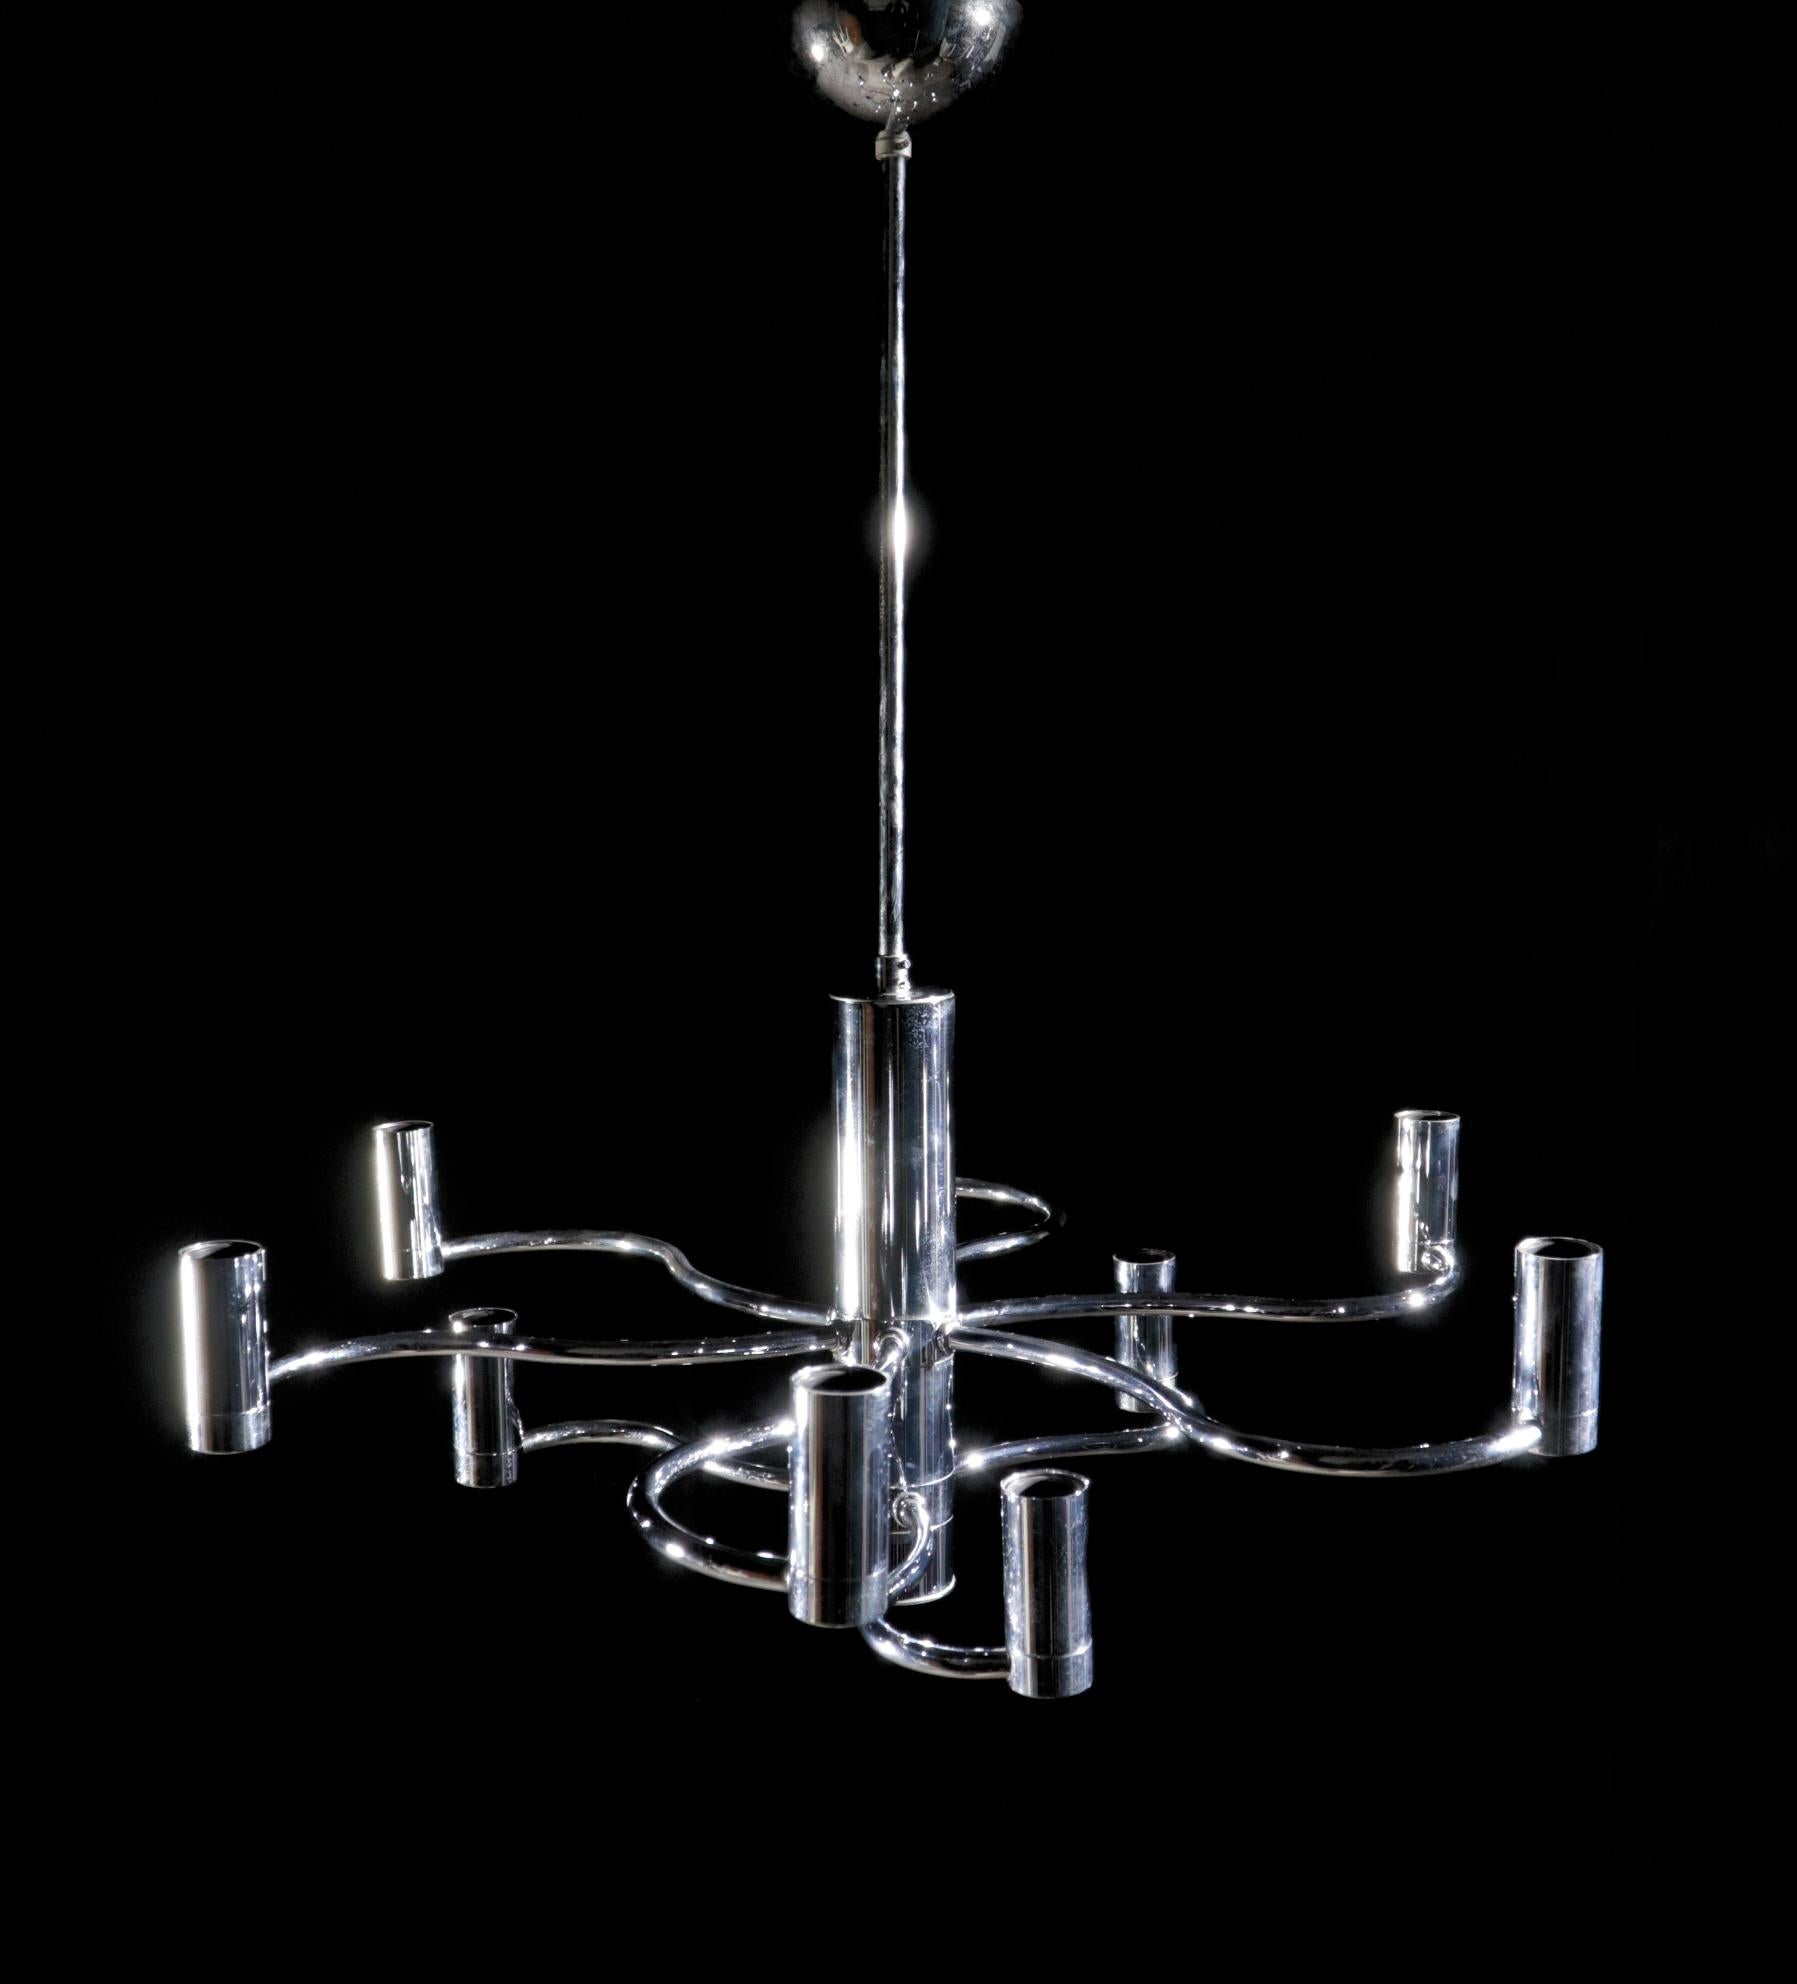 Midcentury design ceiling lamp / chandelier by Gaetano Sciolari from the 1970s.
The lamp has 9 light points and gives beautiful lightning by the reflections on the chrome.